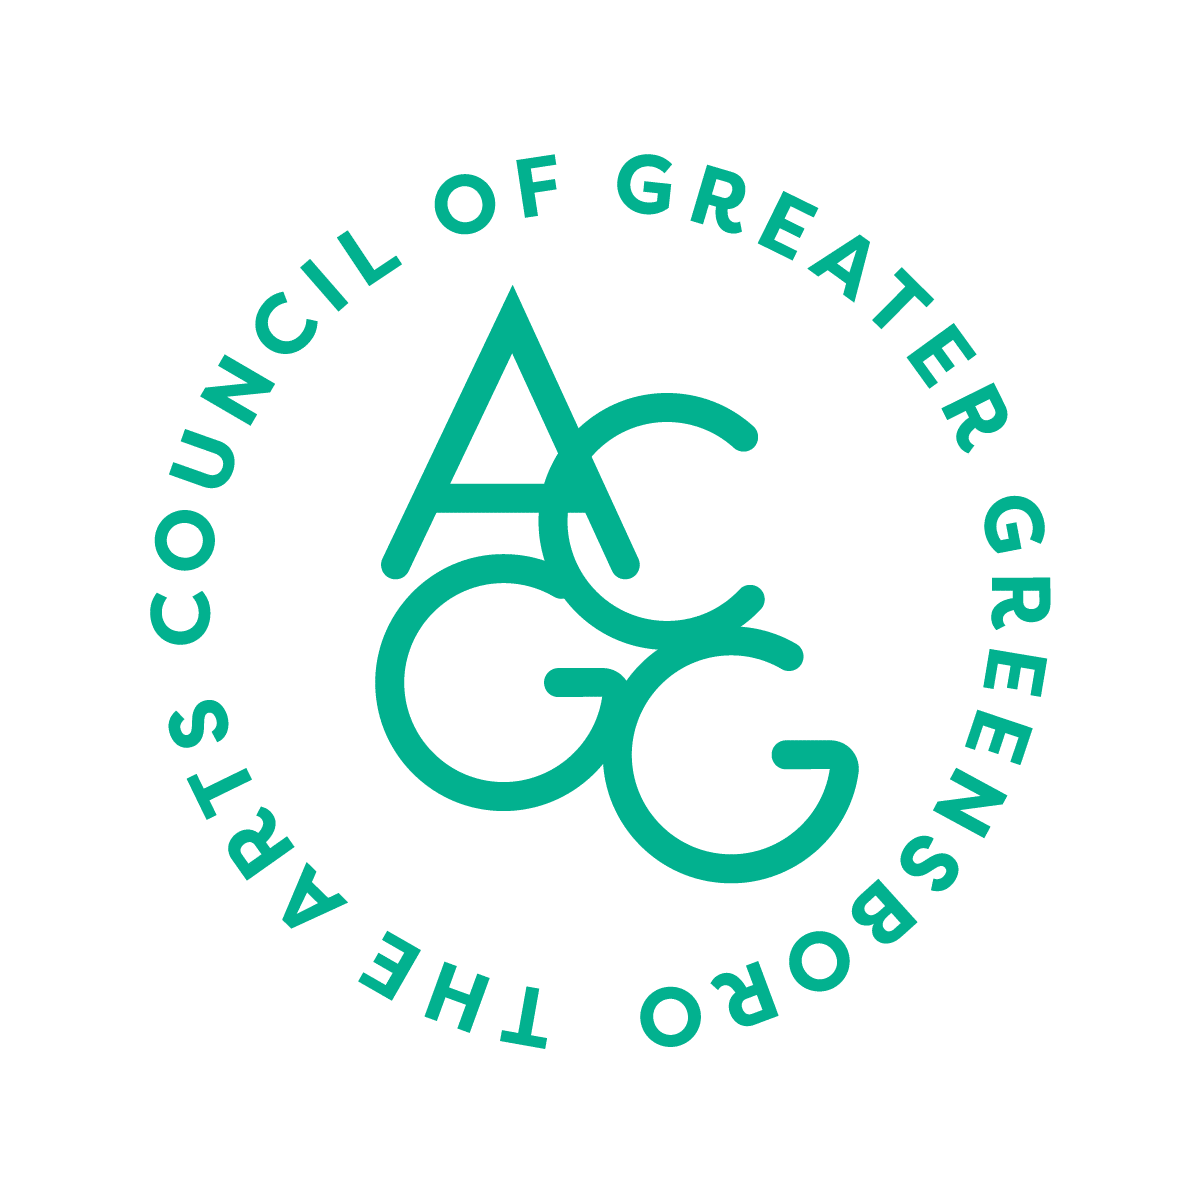 The Arts Council of Greater Greensboro logo